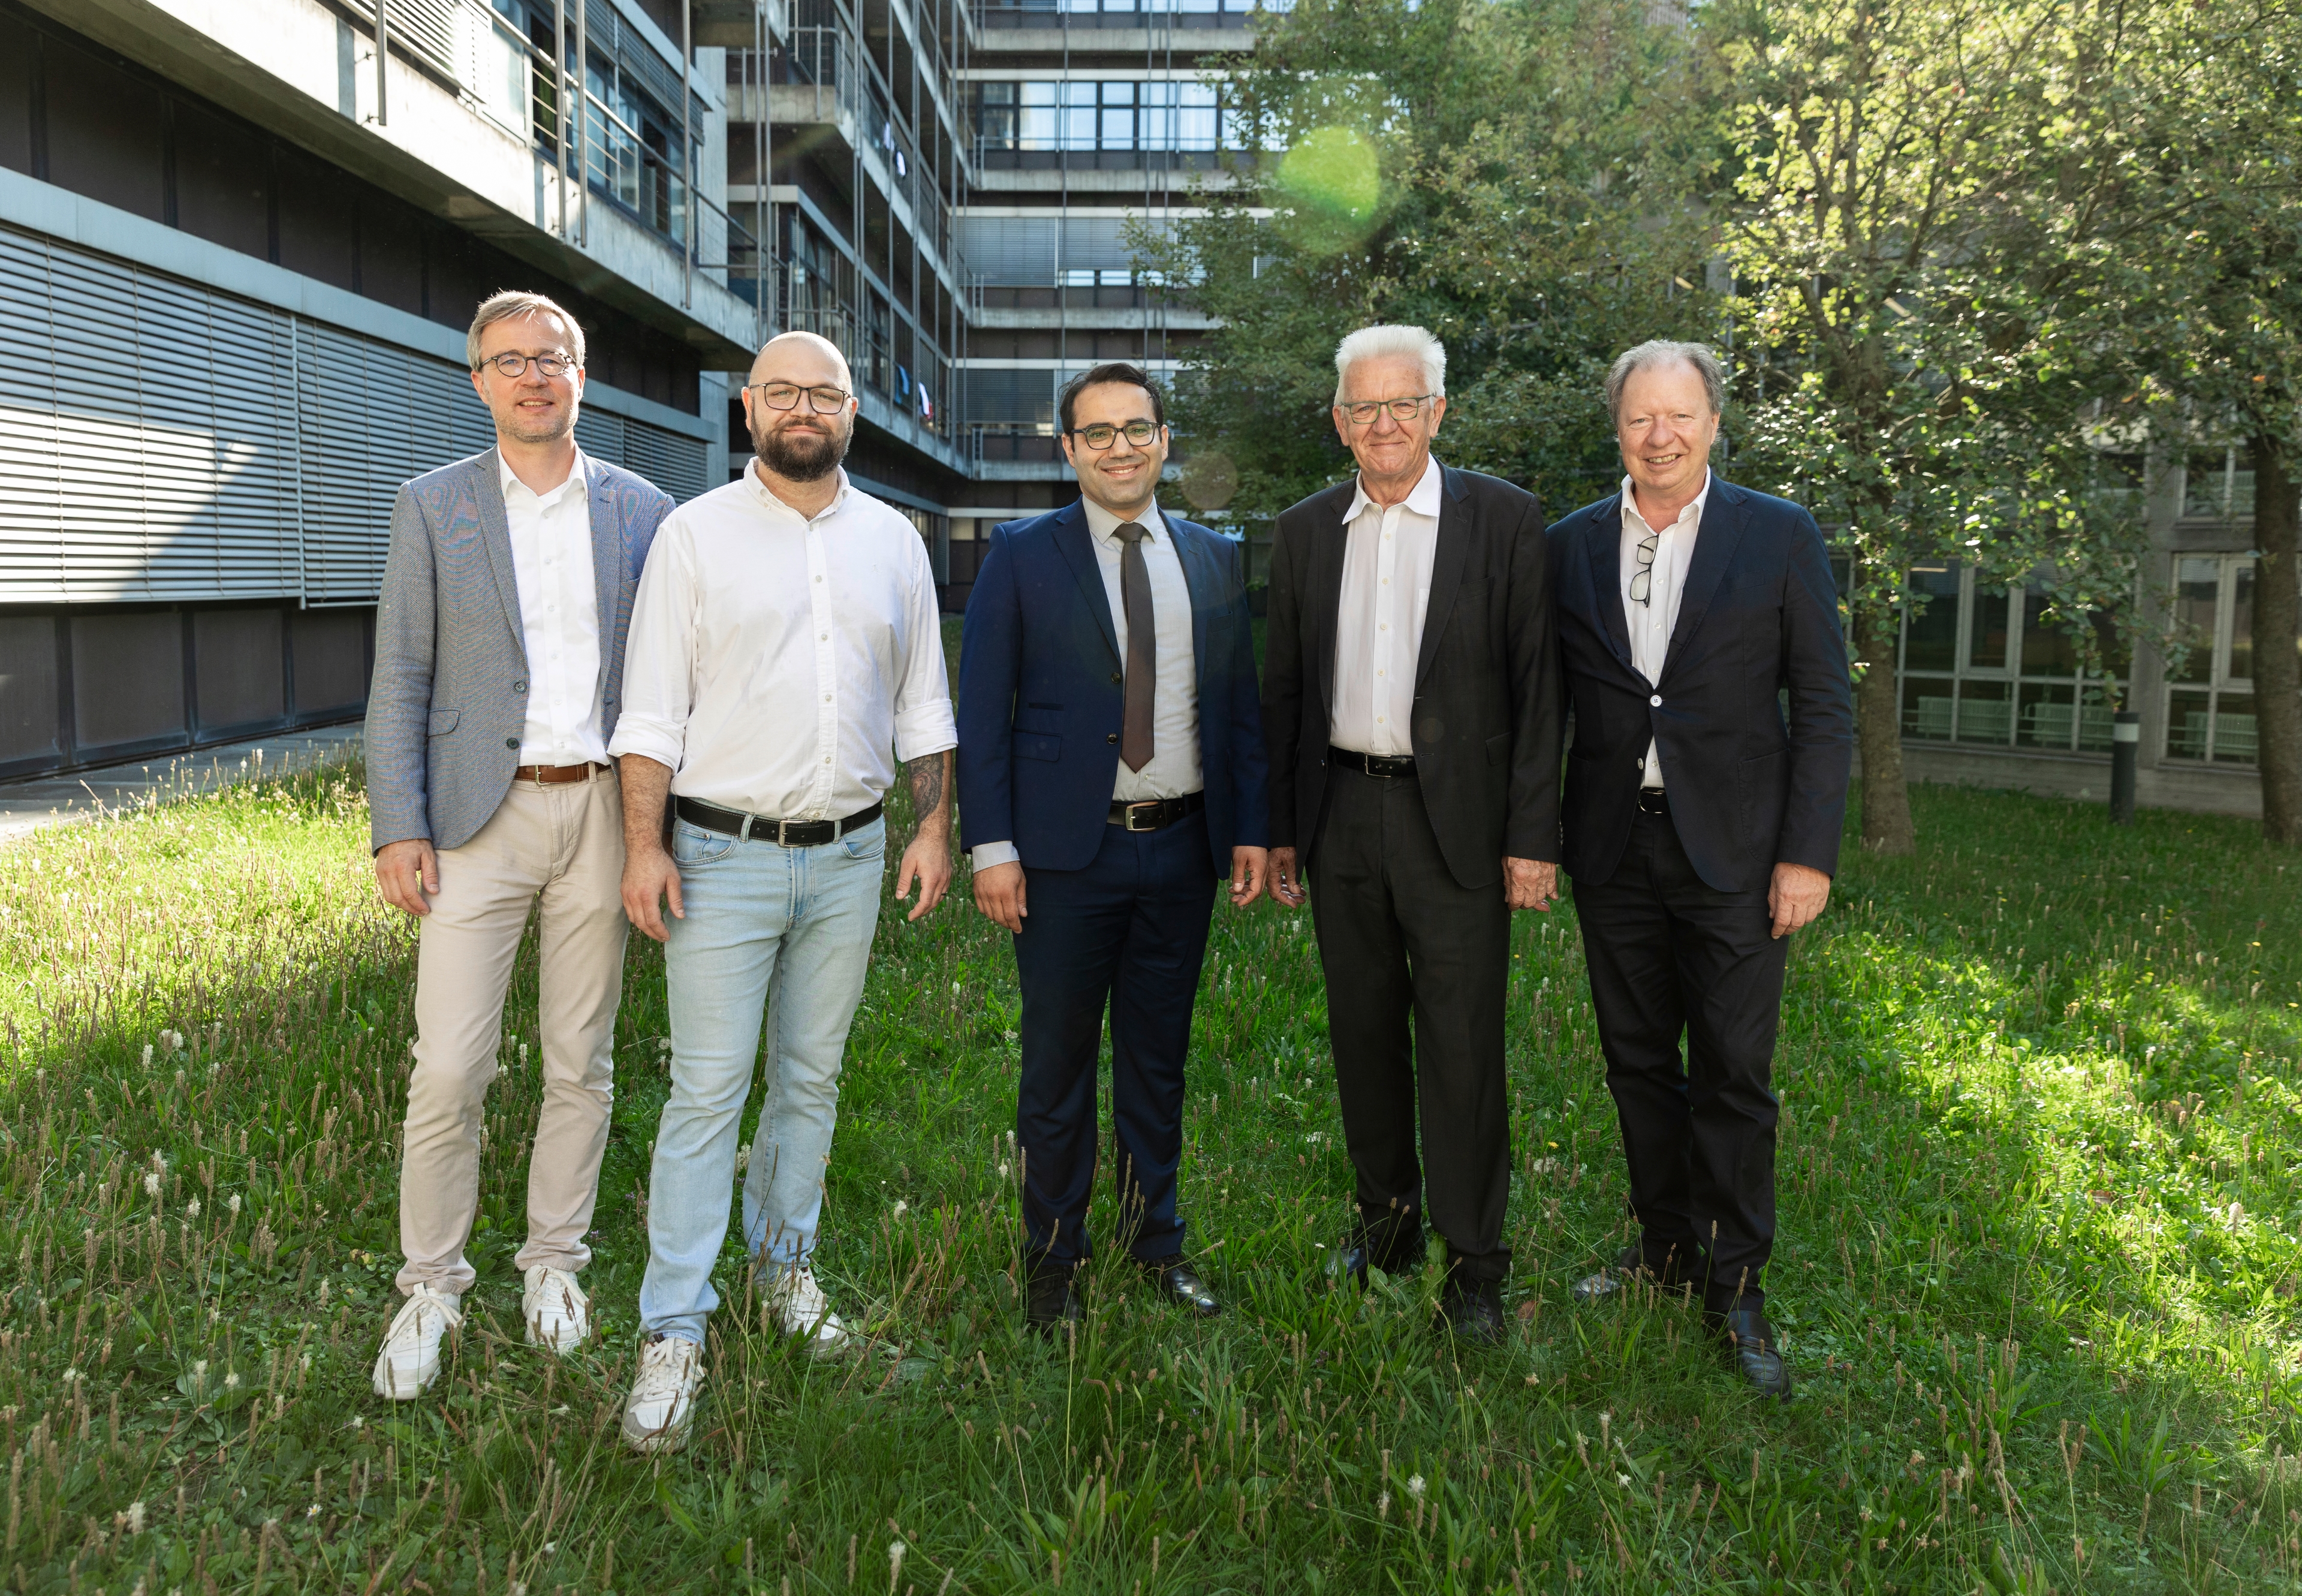 Prof. Michael Saliba (m.) and Dr. Claudiu Mortan (2nd from left) are welcoming Minister-President Kretschmann at the Institute for Photovoltaics